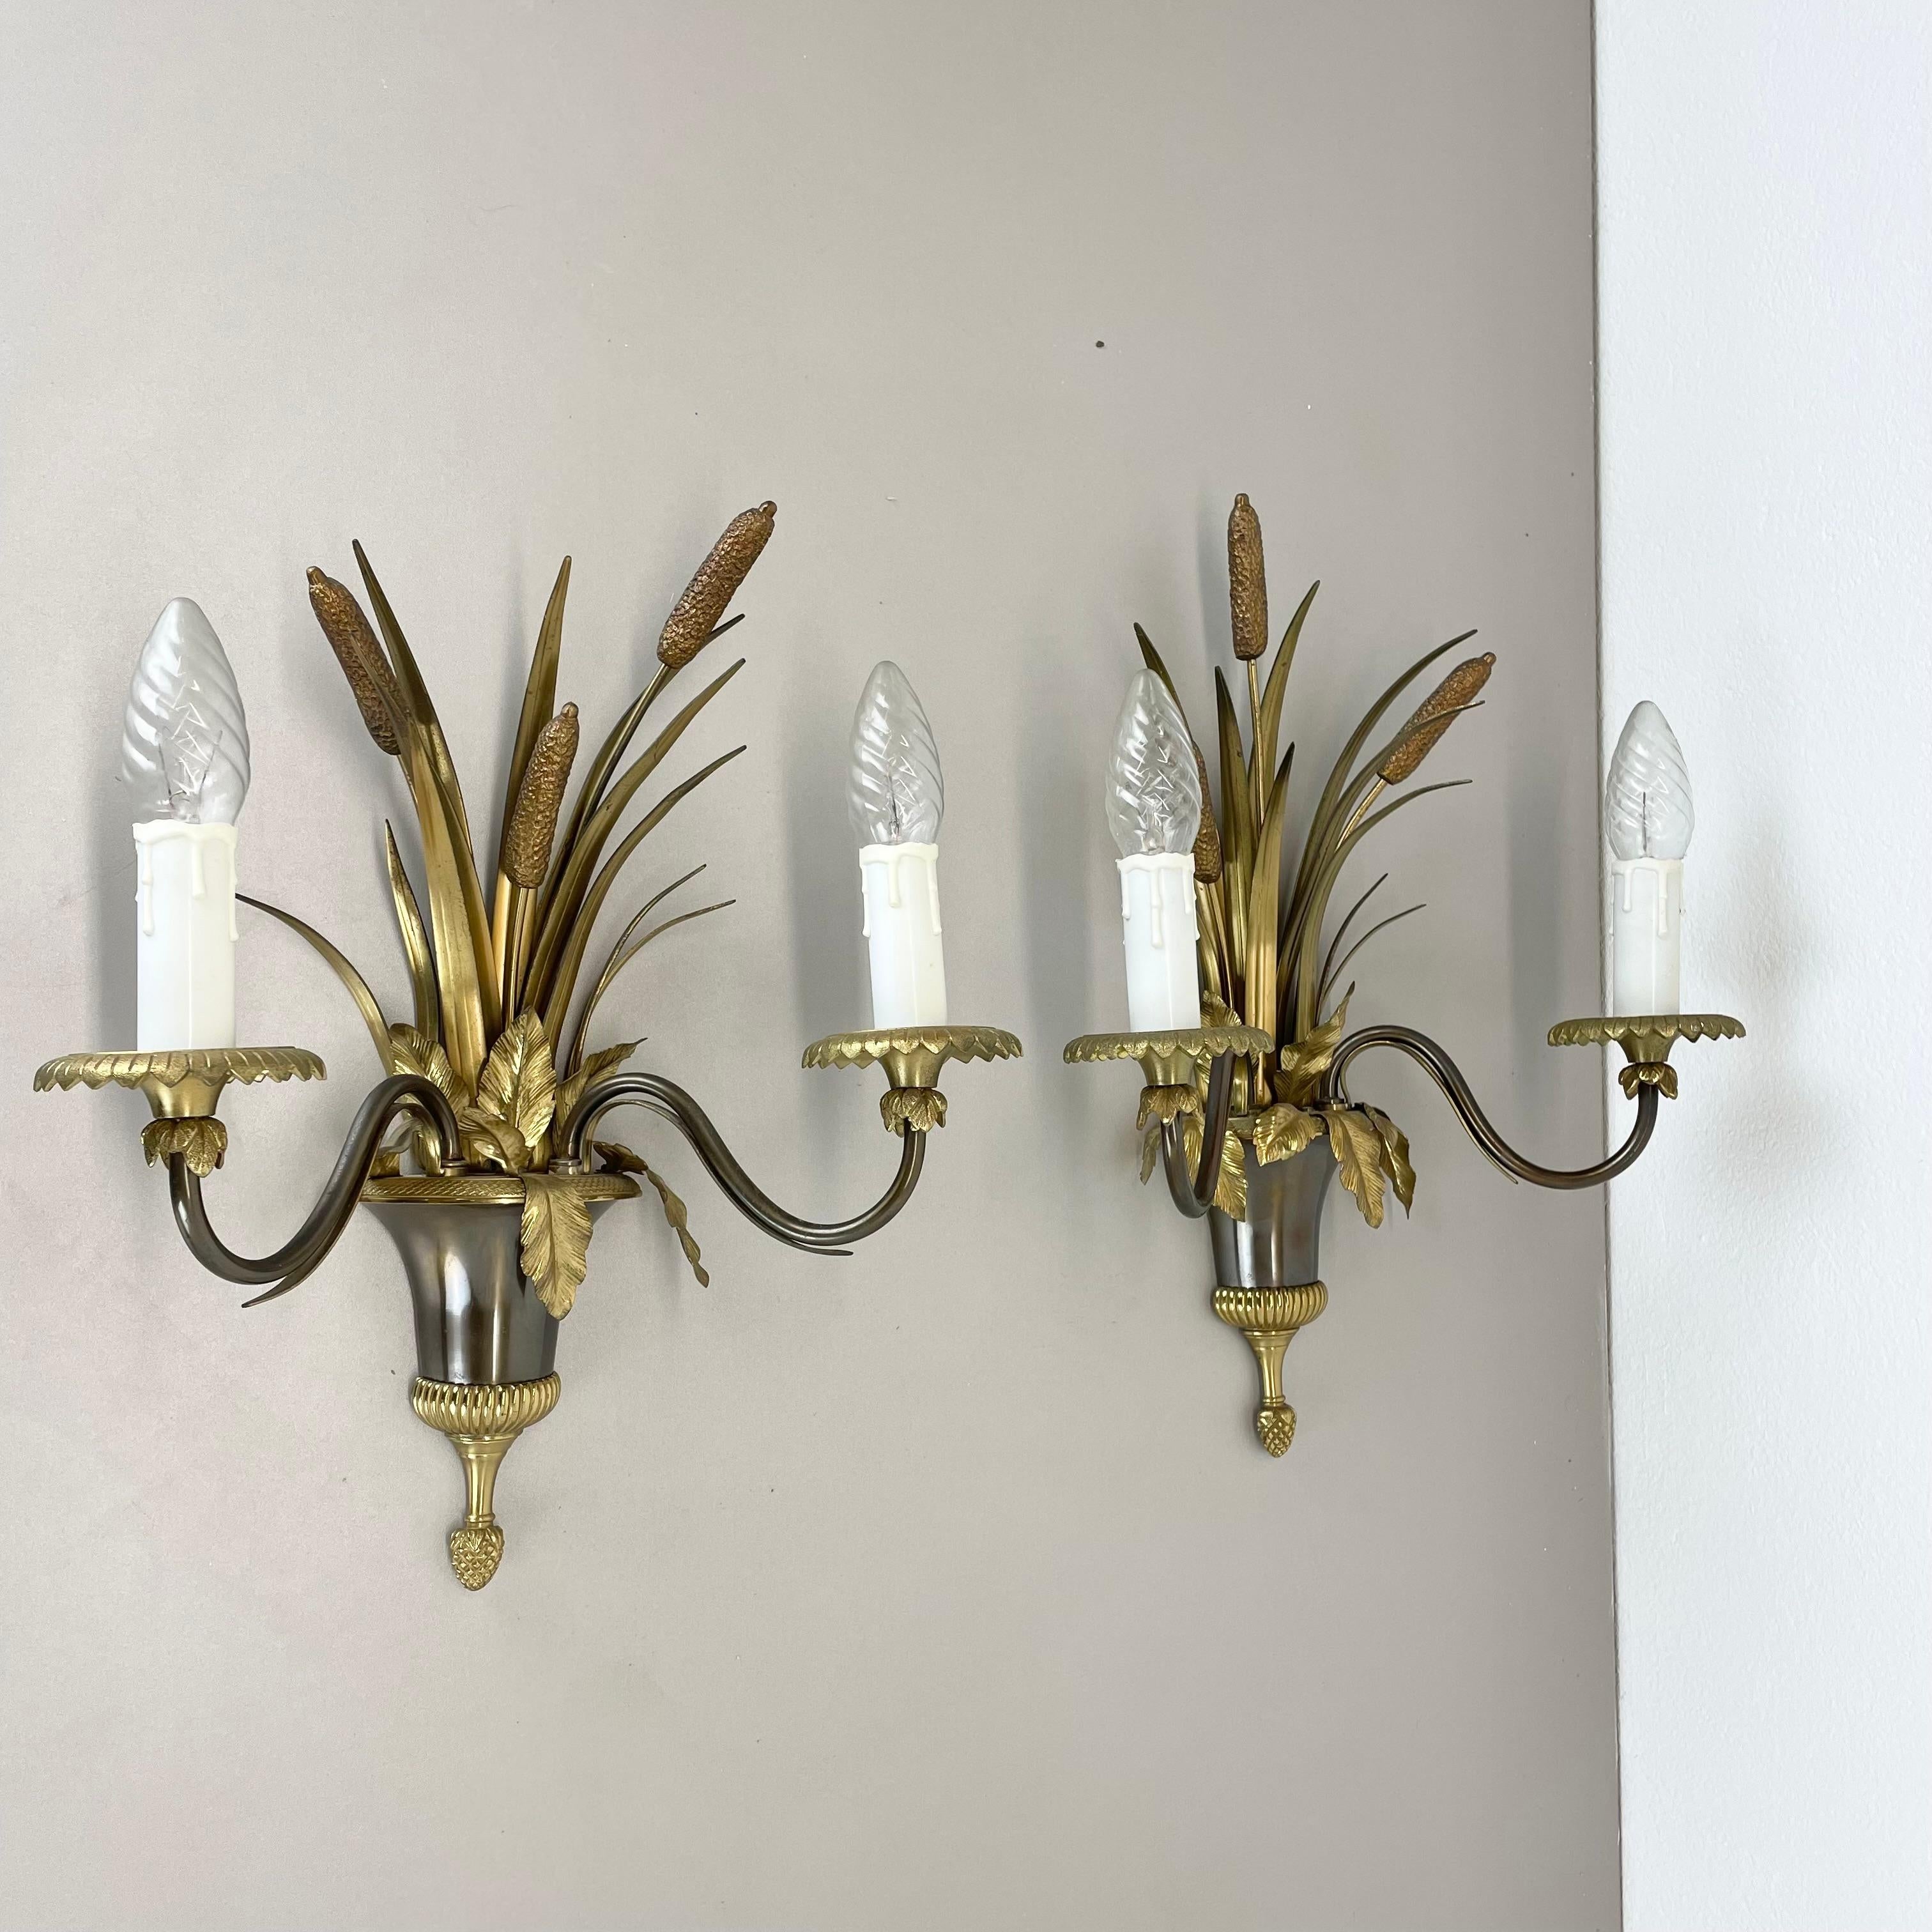 Article: unique hollywood regency wall light set of 2

Origin: France

Design producer: MAISON CHARLES (one light is marked on the backside wall fixation with CHARLES and made in France)

Material:  brass, metal plastic

Decade: 1970s

Description: